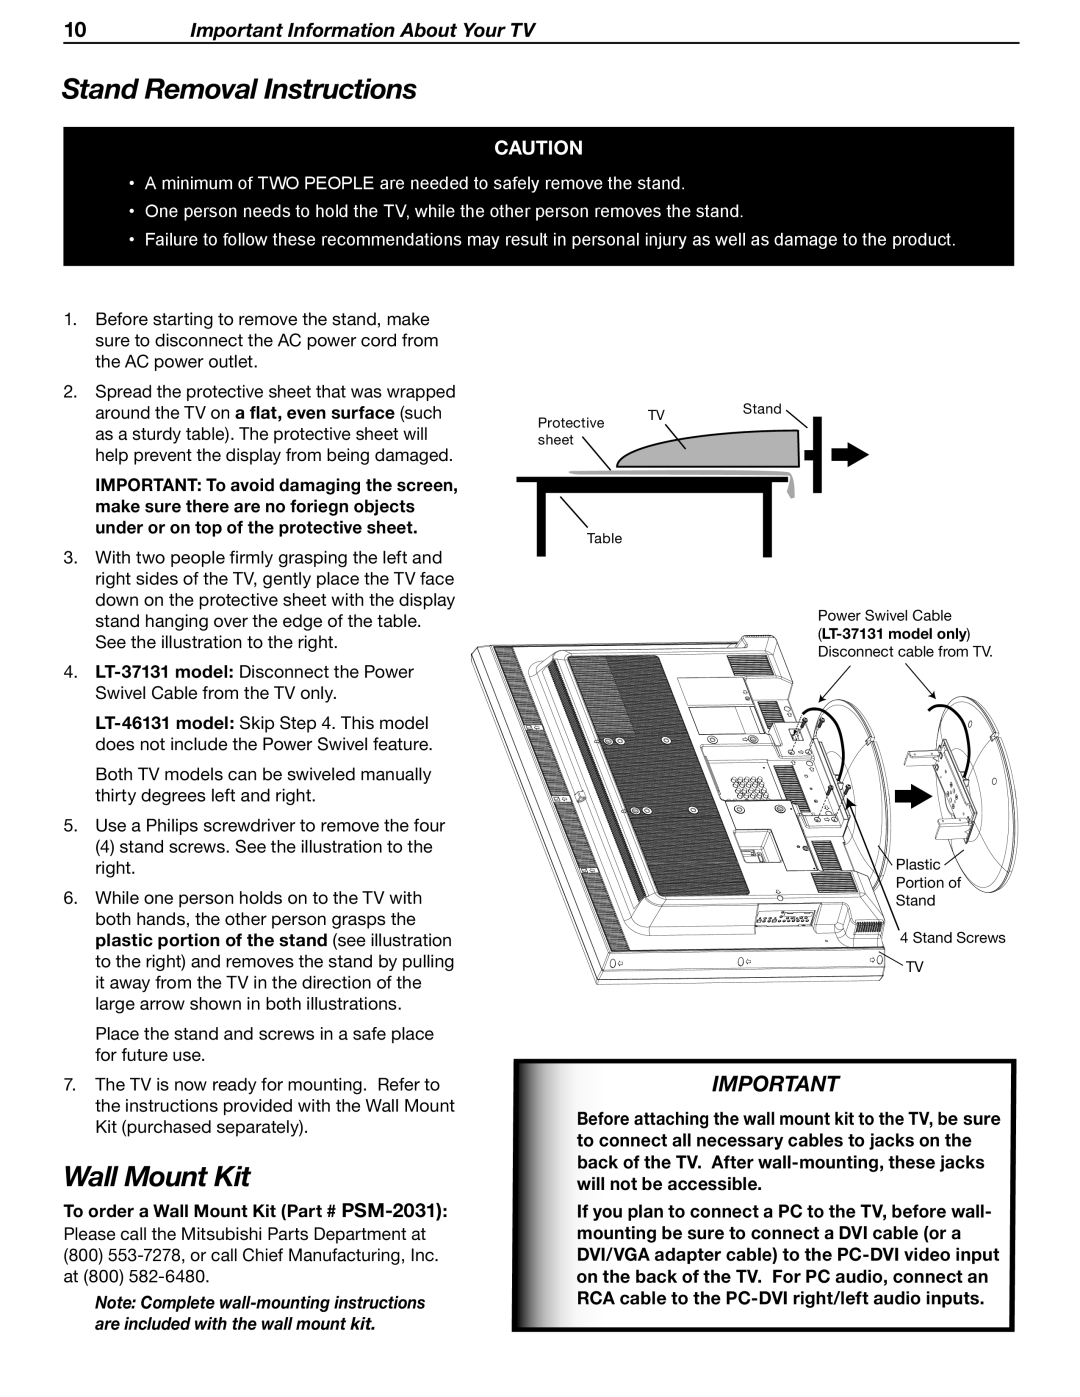 Mitsubishi Electronics LT-37131 manual Stand Removal Instructions, Wall Mount Kit, Important Information About Your TV 